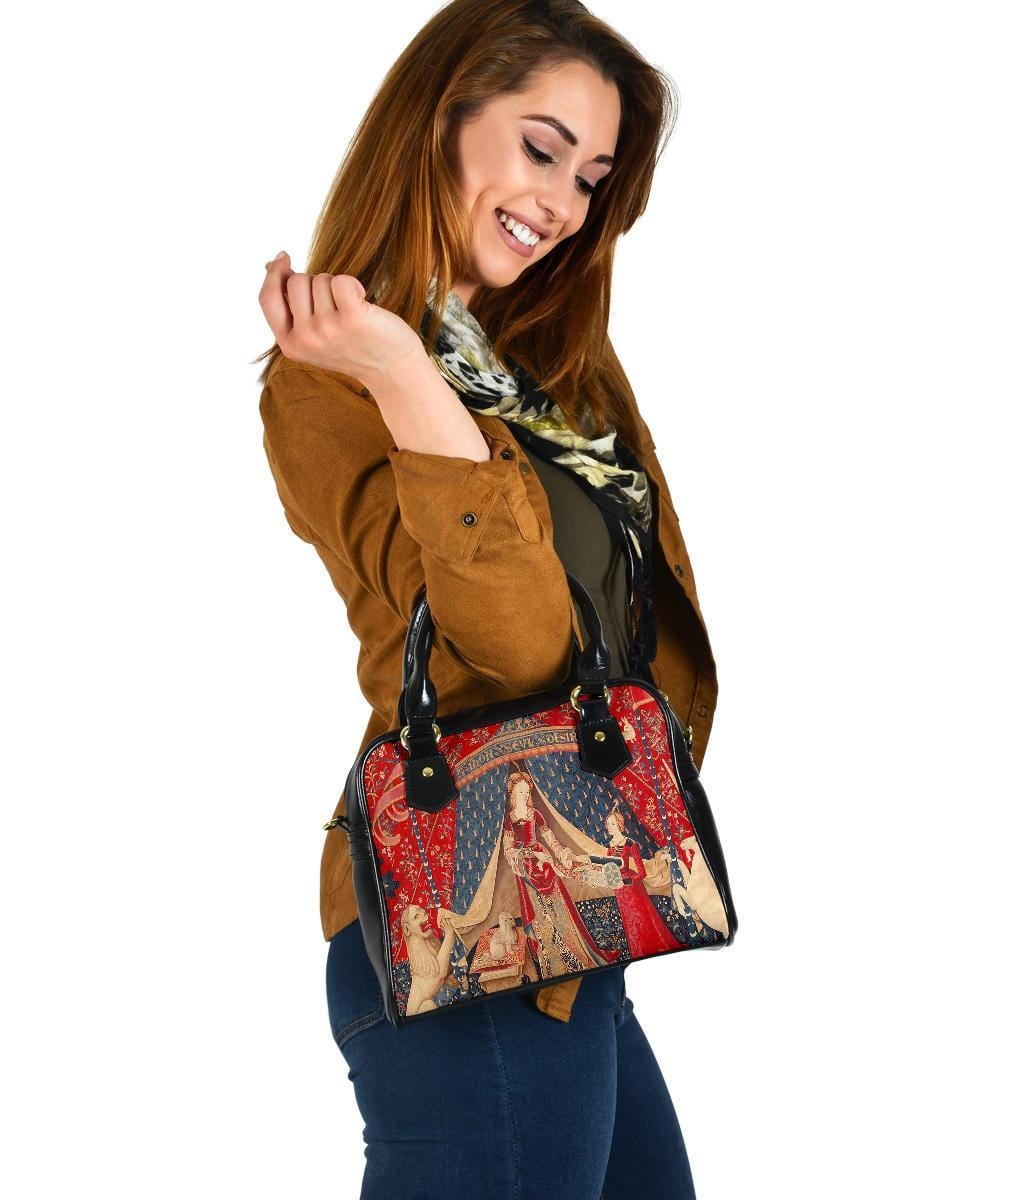 smiling woman looking down at her new The Lady & the Unicorn medieval tapestry artwork printed on a vegan leather women's handbag